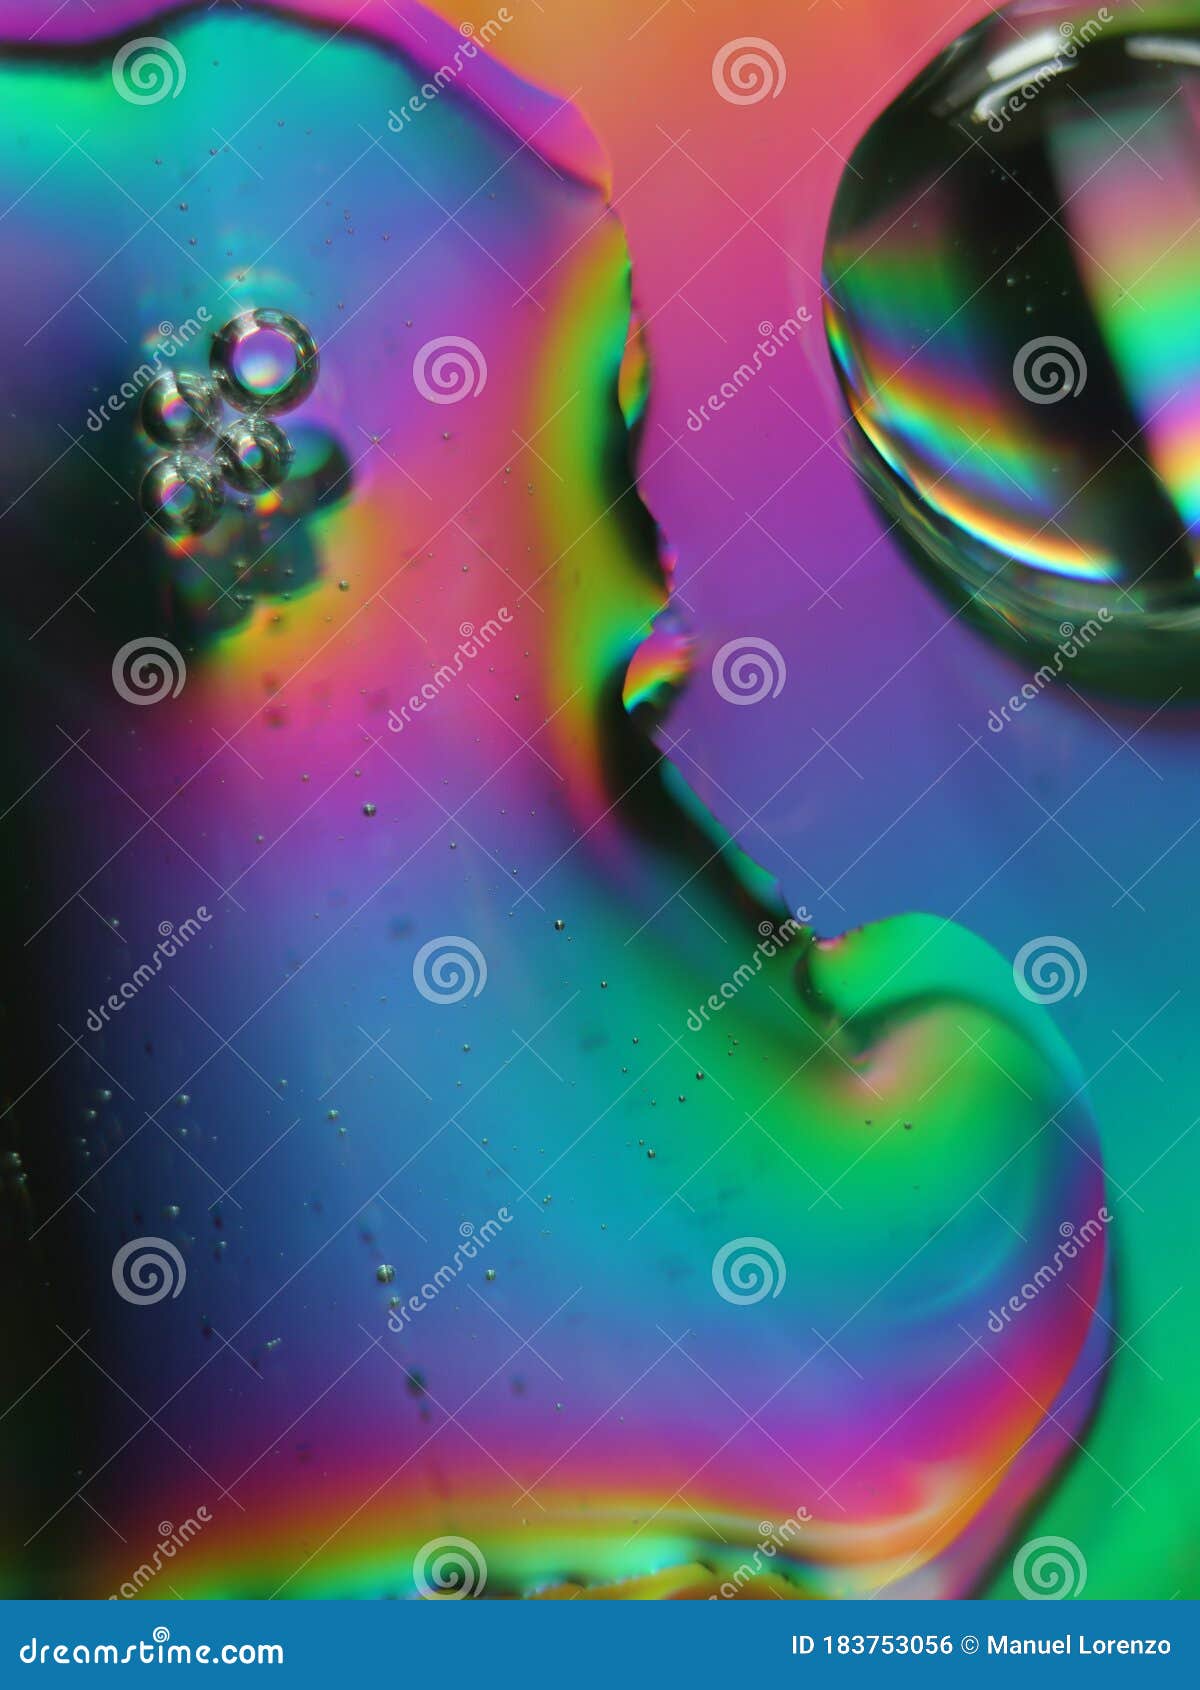 abstract colors rainbow drops reflexes macro background blur